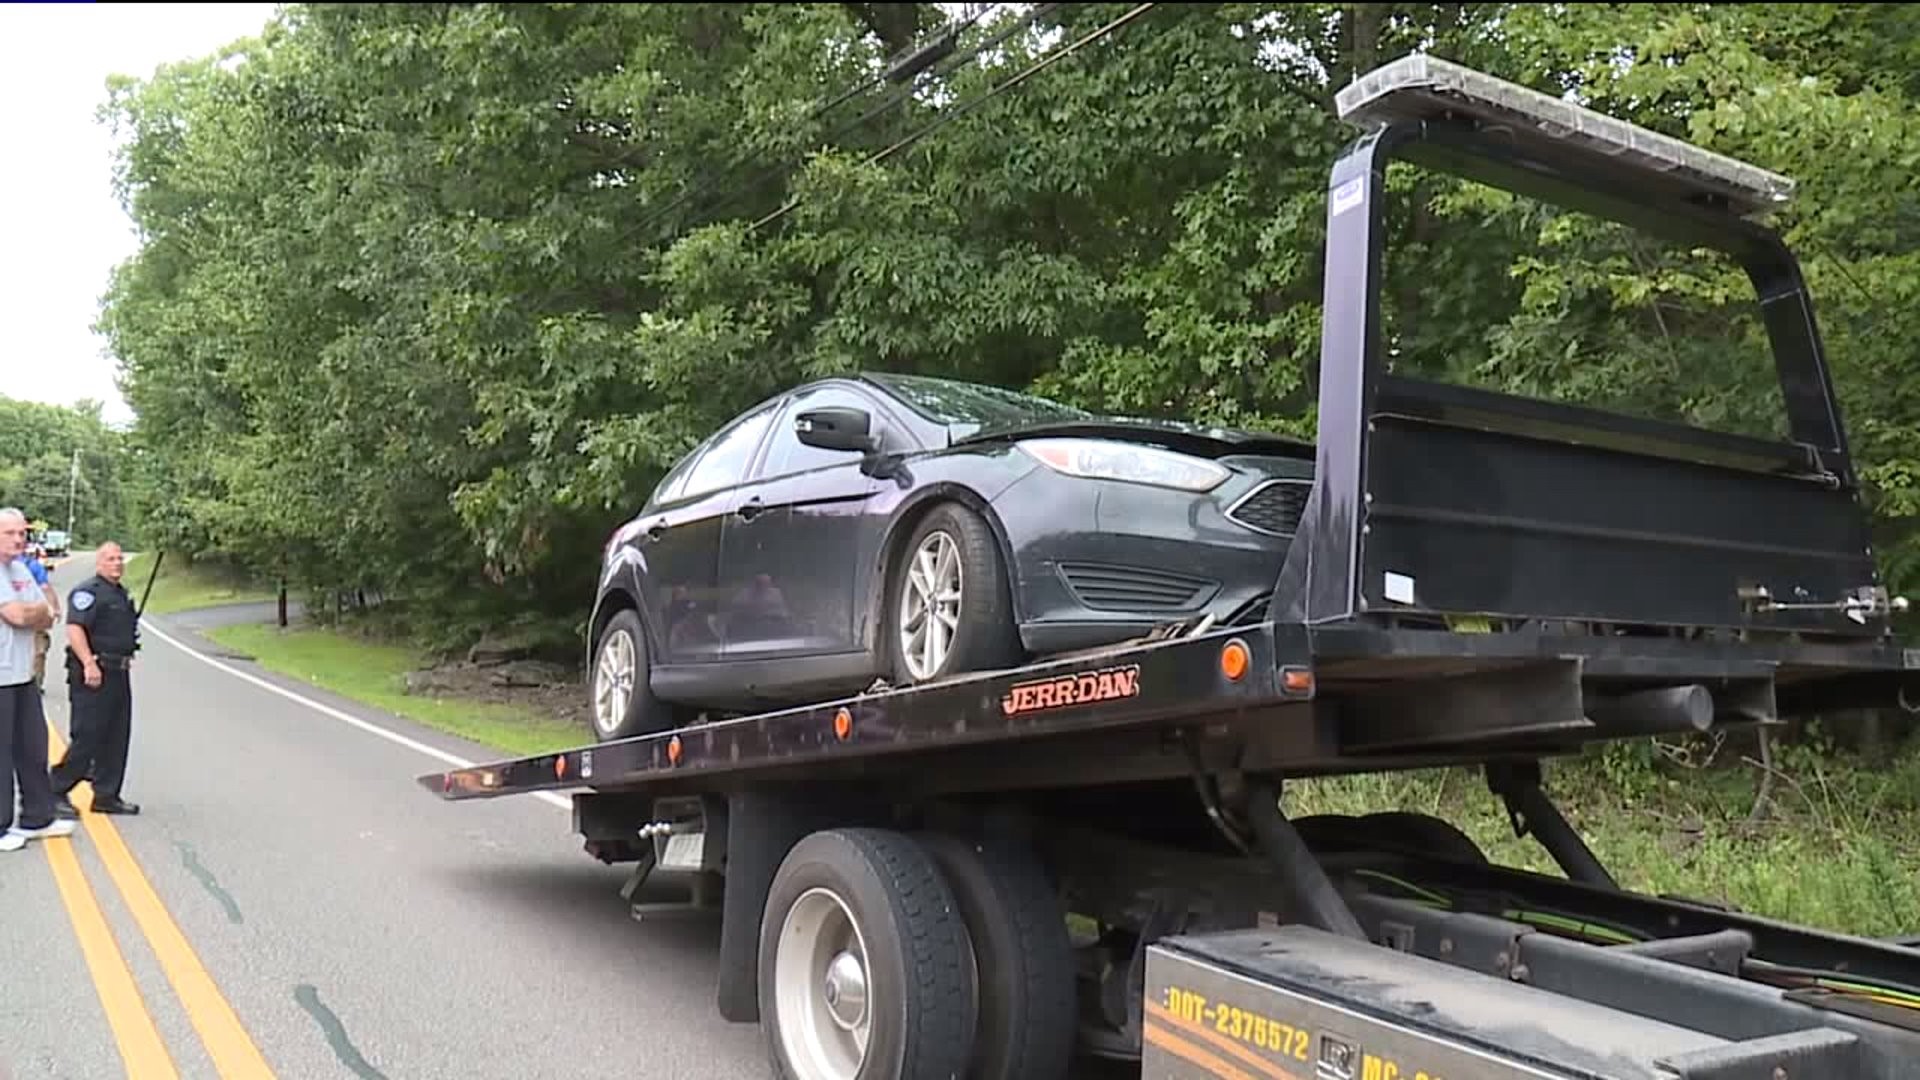 Car, Truck Collide in Luzerne County